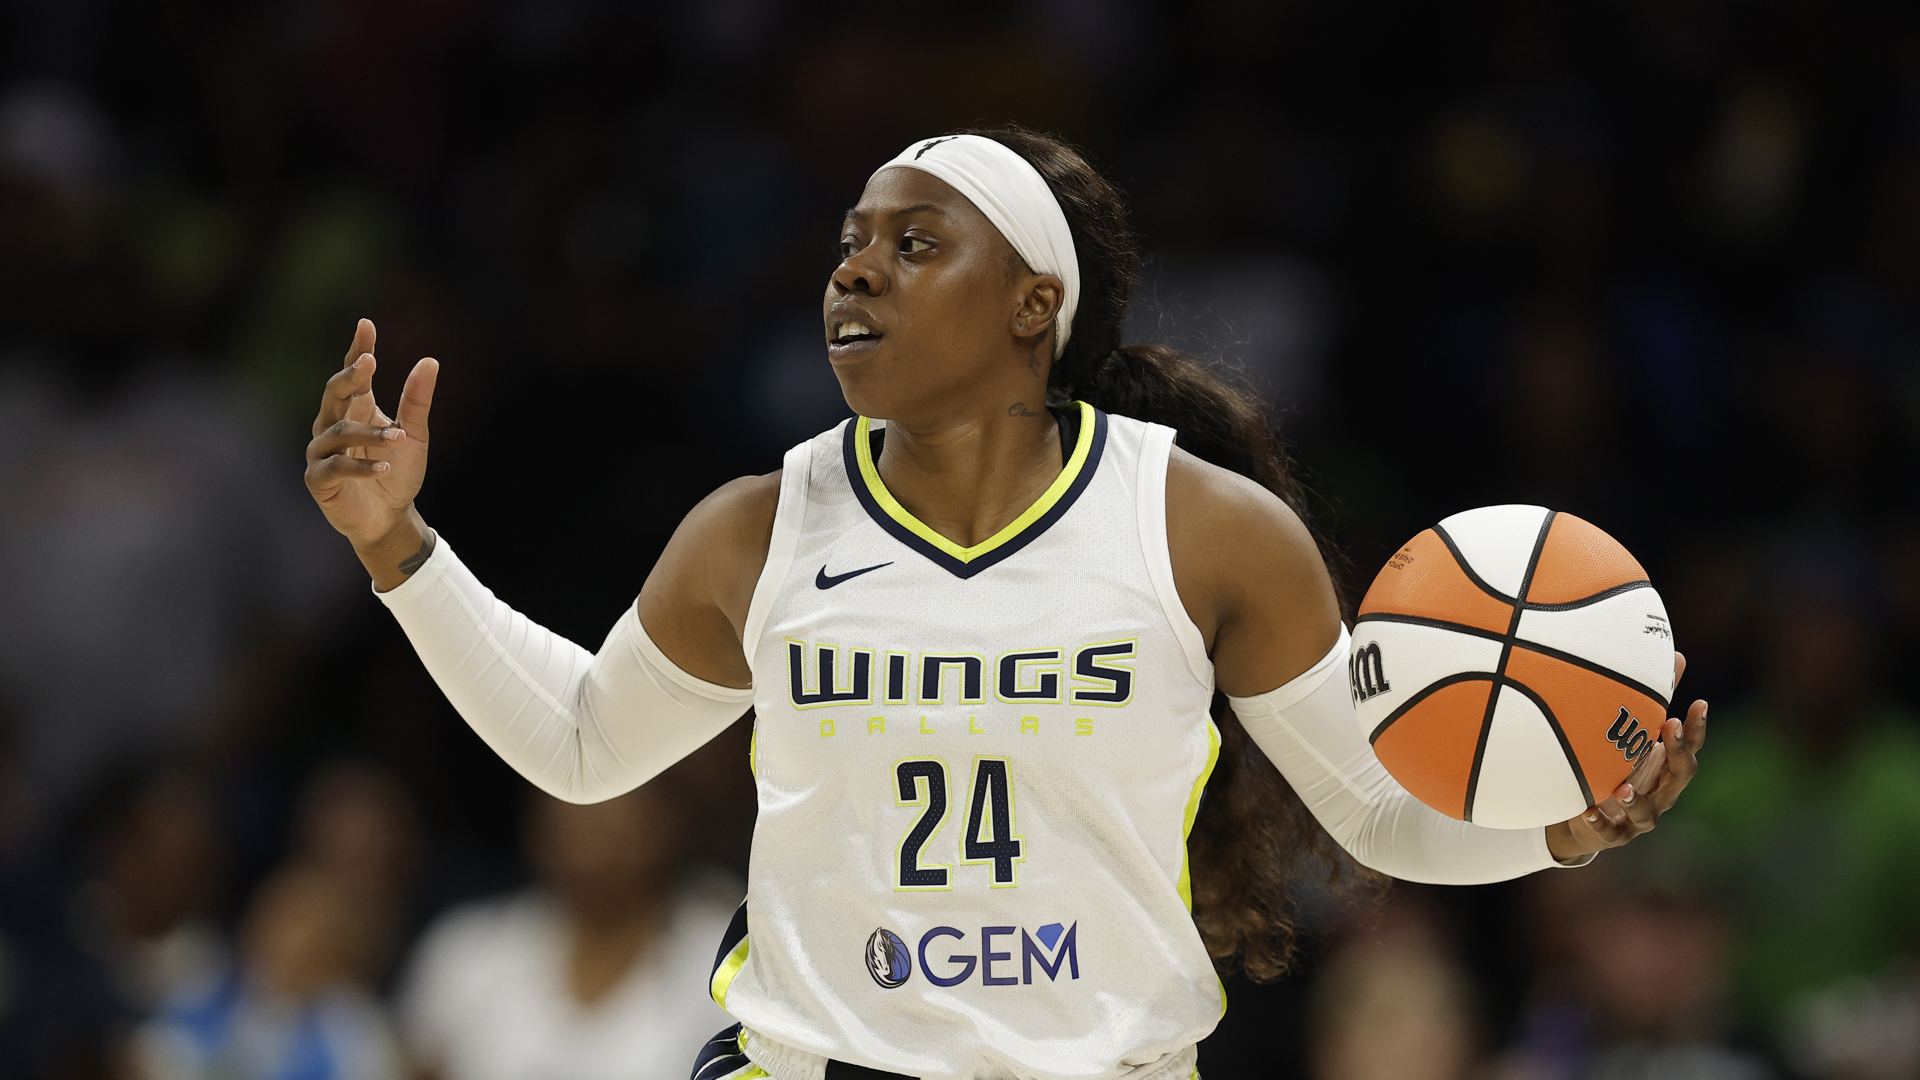 The Dallas Wings guard is the WNBA's second-highest scorer.